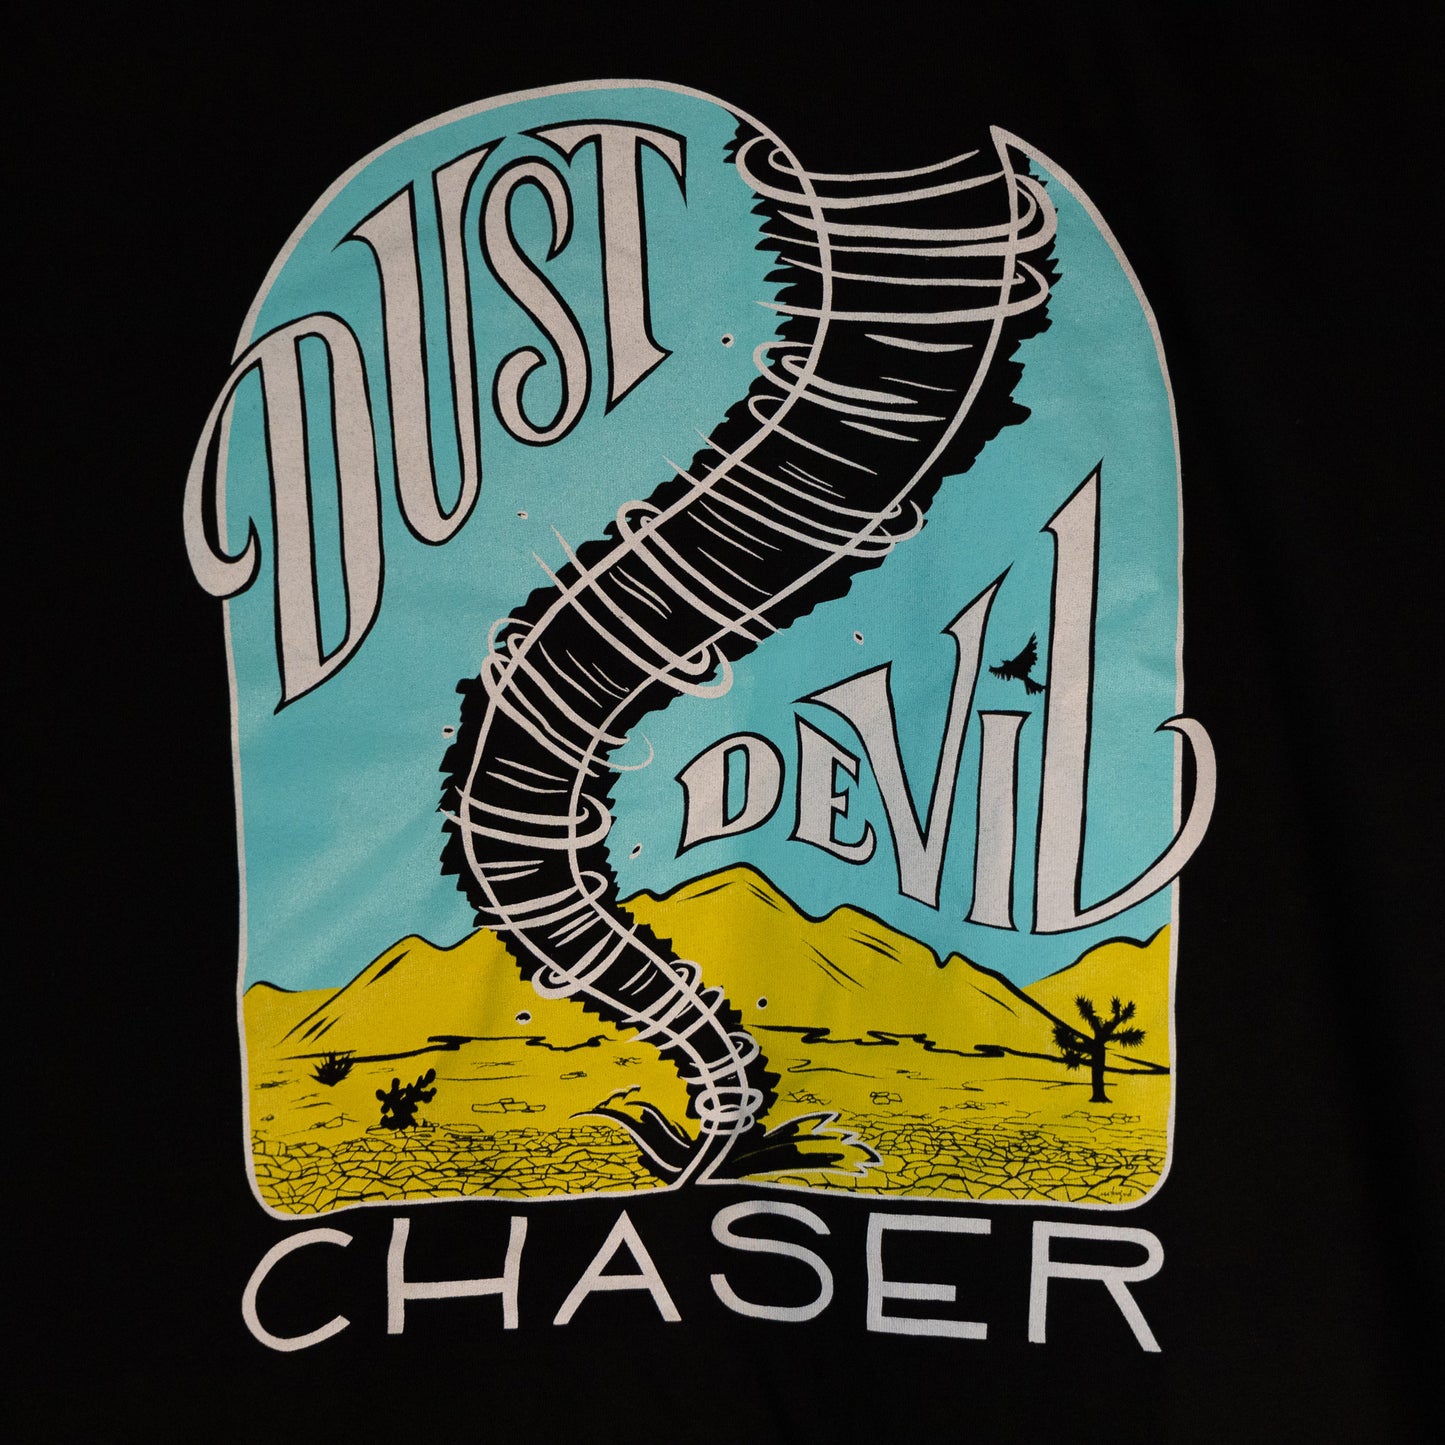 A close up of the design. The gender neutral hooded black colored t-shirt has a white, bright blue, and yellow dust devil illustration in the center. The words "Dust Devil Chaser" are written in a white handwritten font within and below the design.